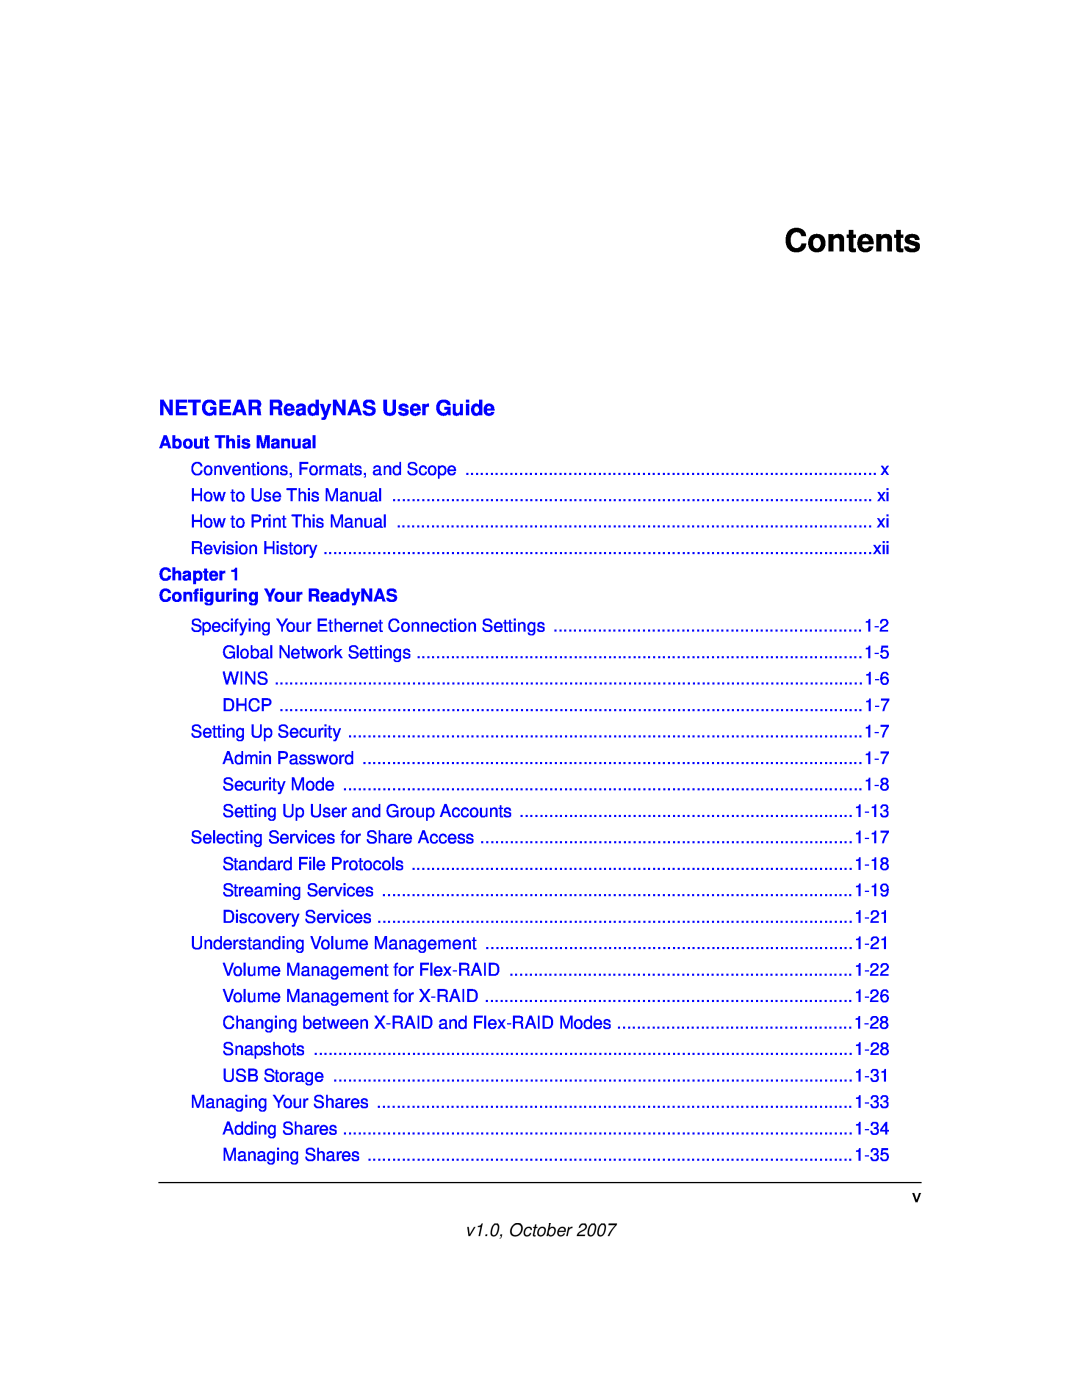 NETGEAR RN10223D-100NAS manual Contents, NETGEAR ReadyNAS User Guide, About This Manual, Chapter, Configuring Your ReadyNAS 